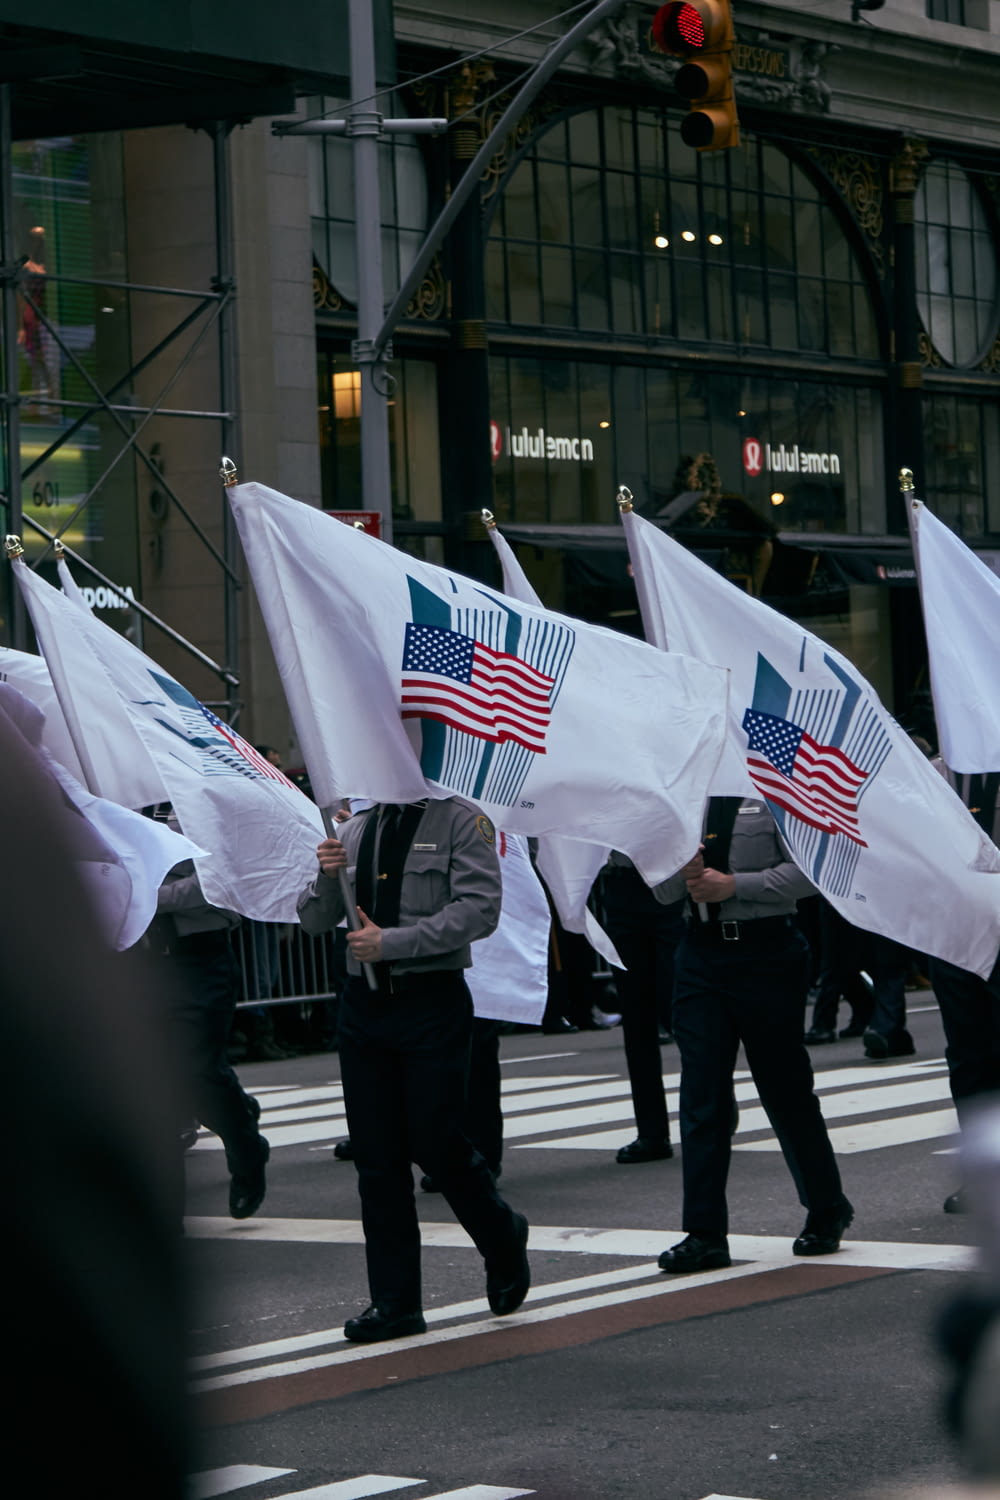 walking solider holding US flag with high-rise buildings background banners